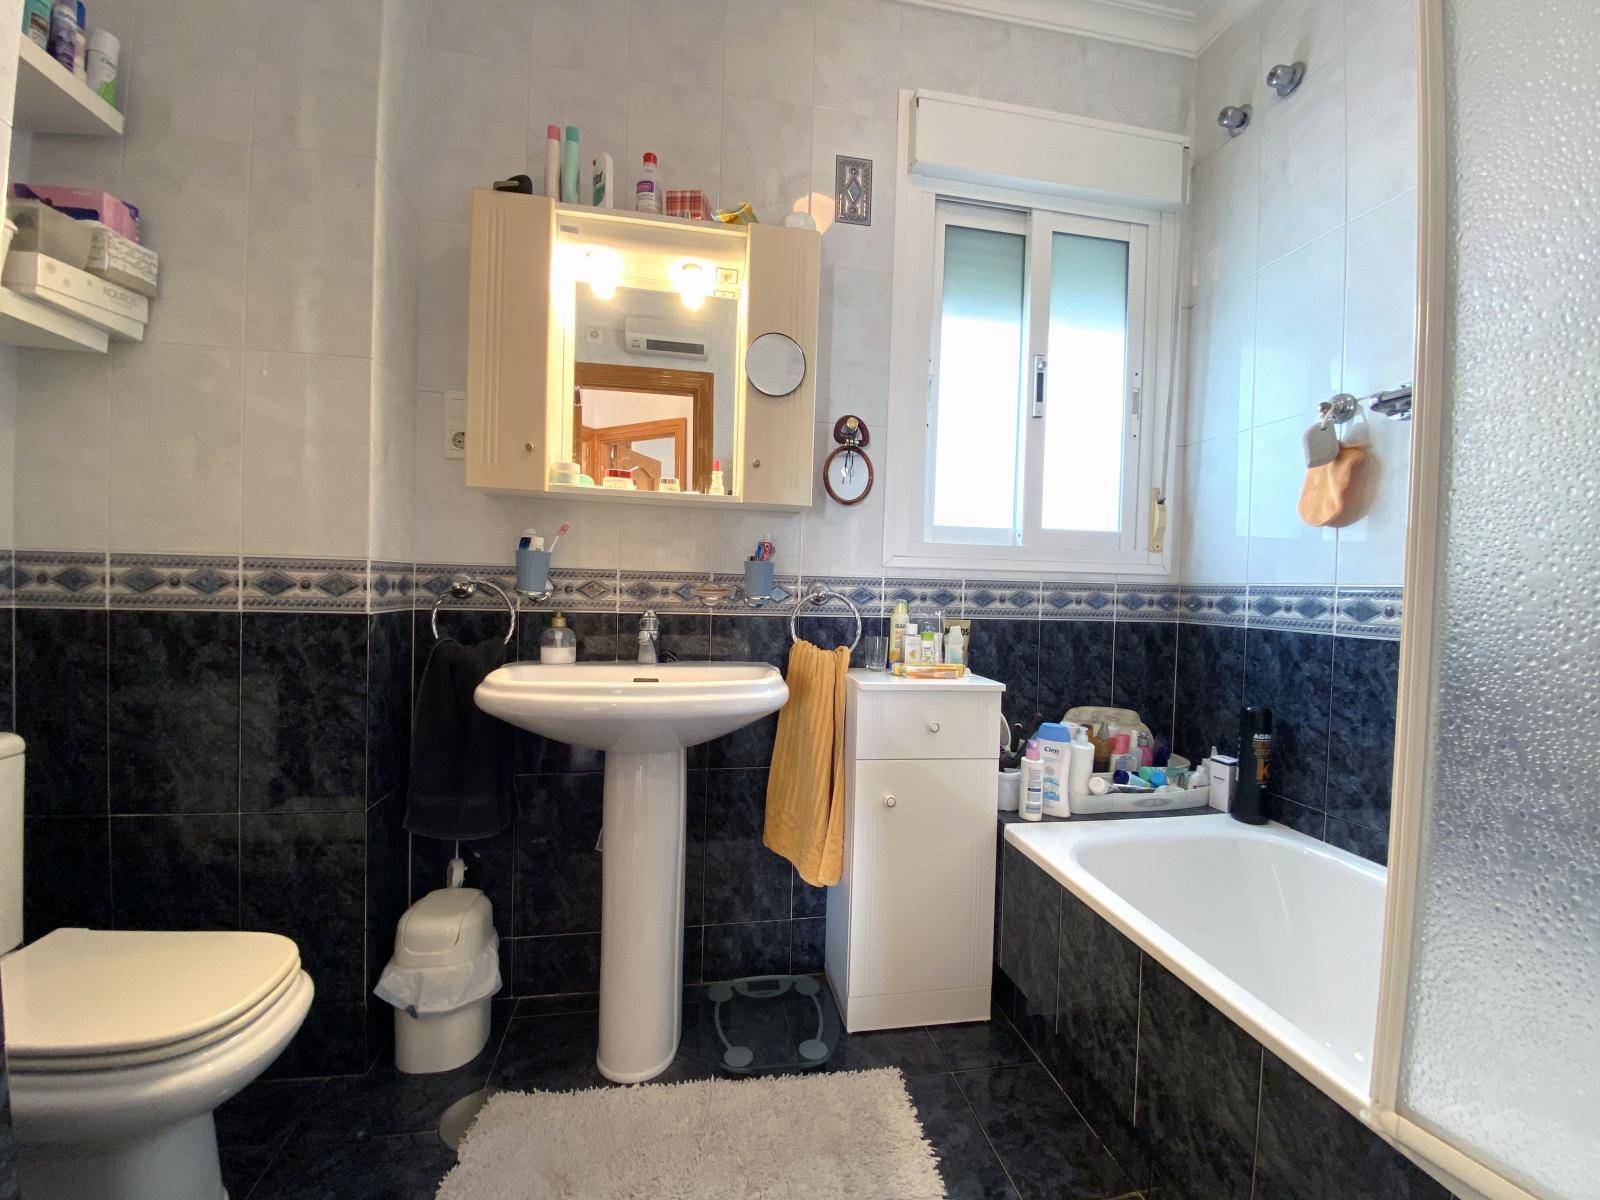 House for sale in Torrox Costa